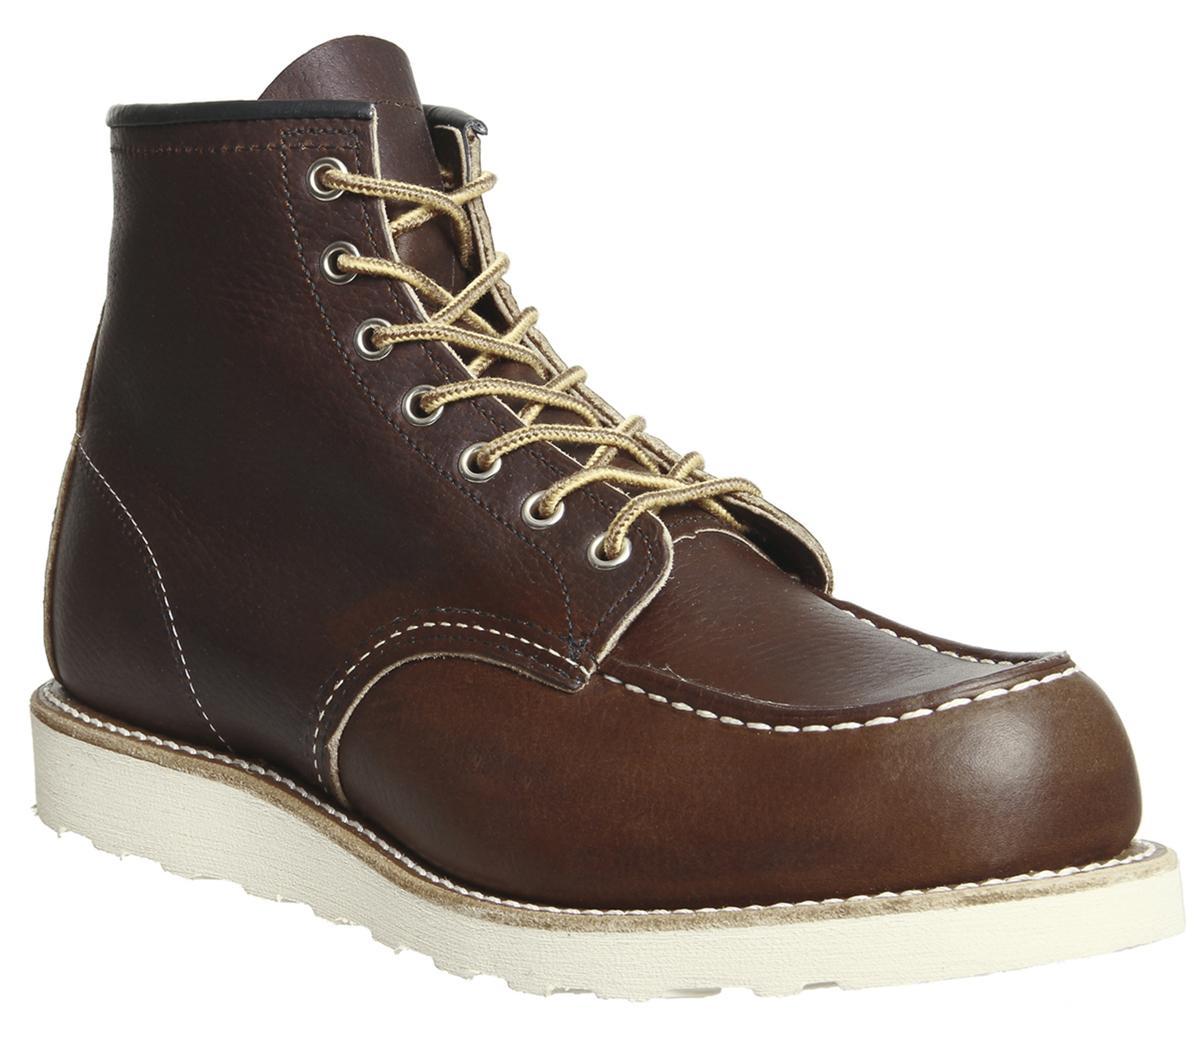 red wing wedge boots